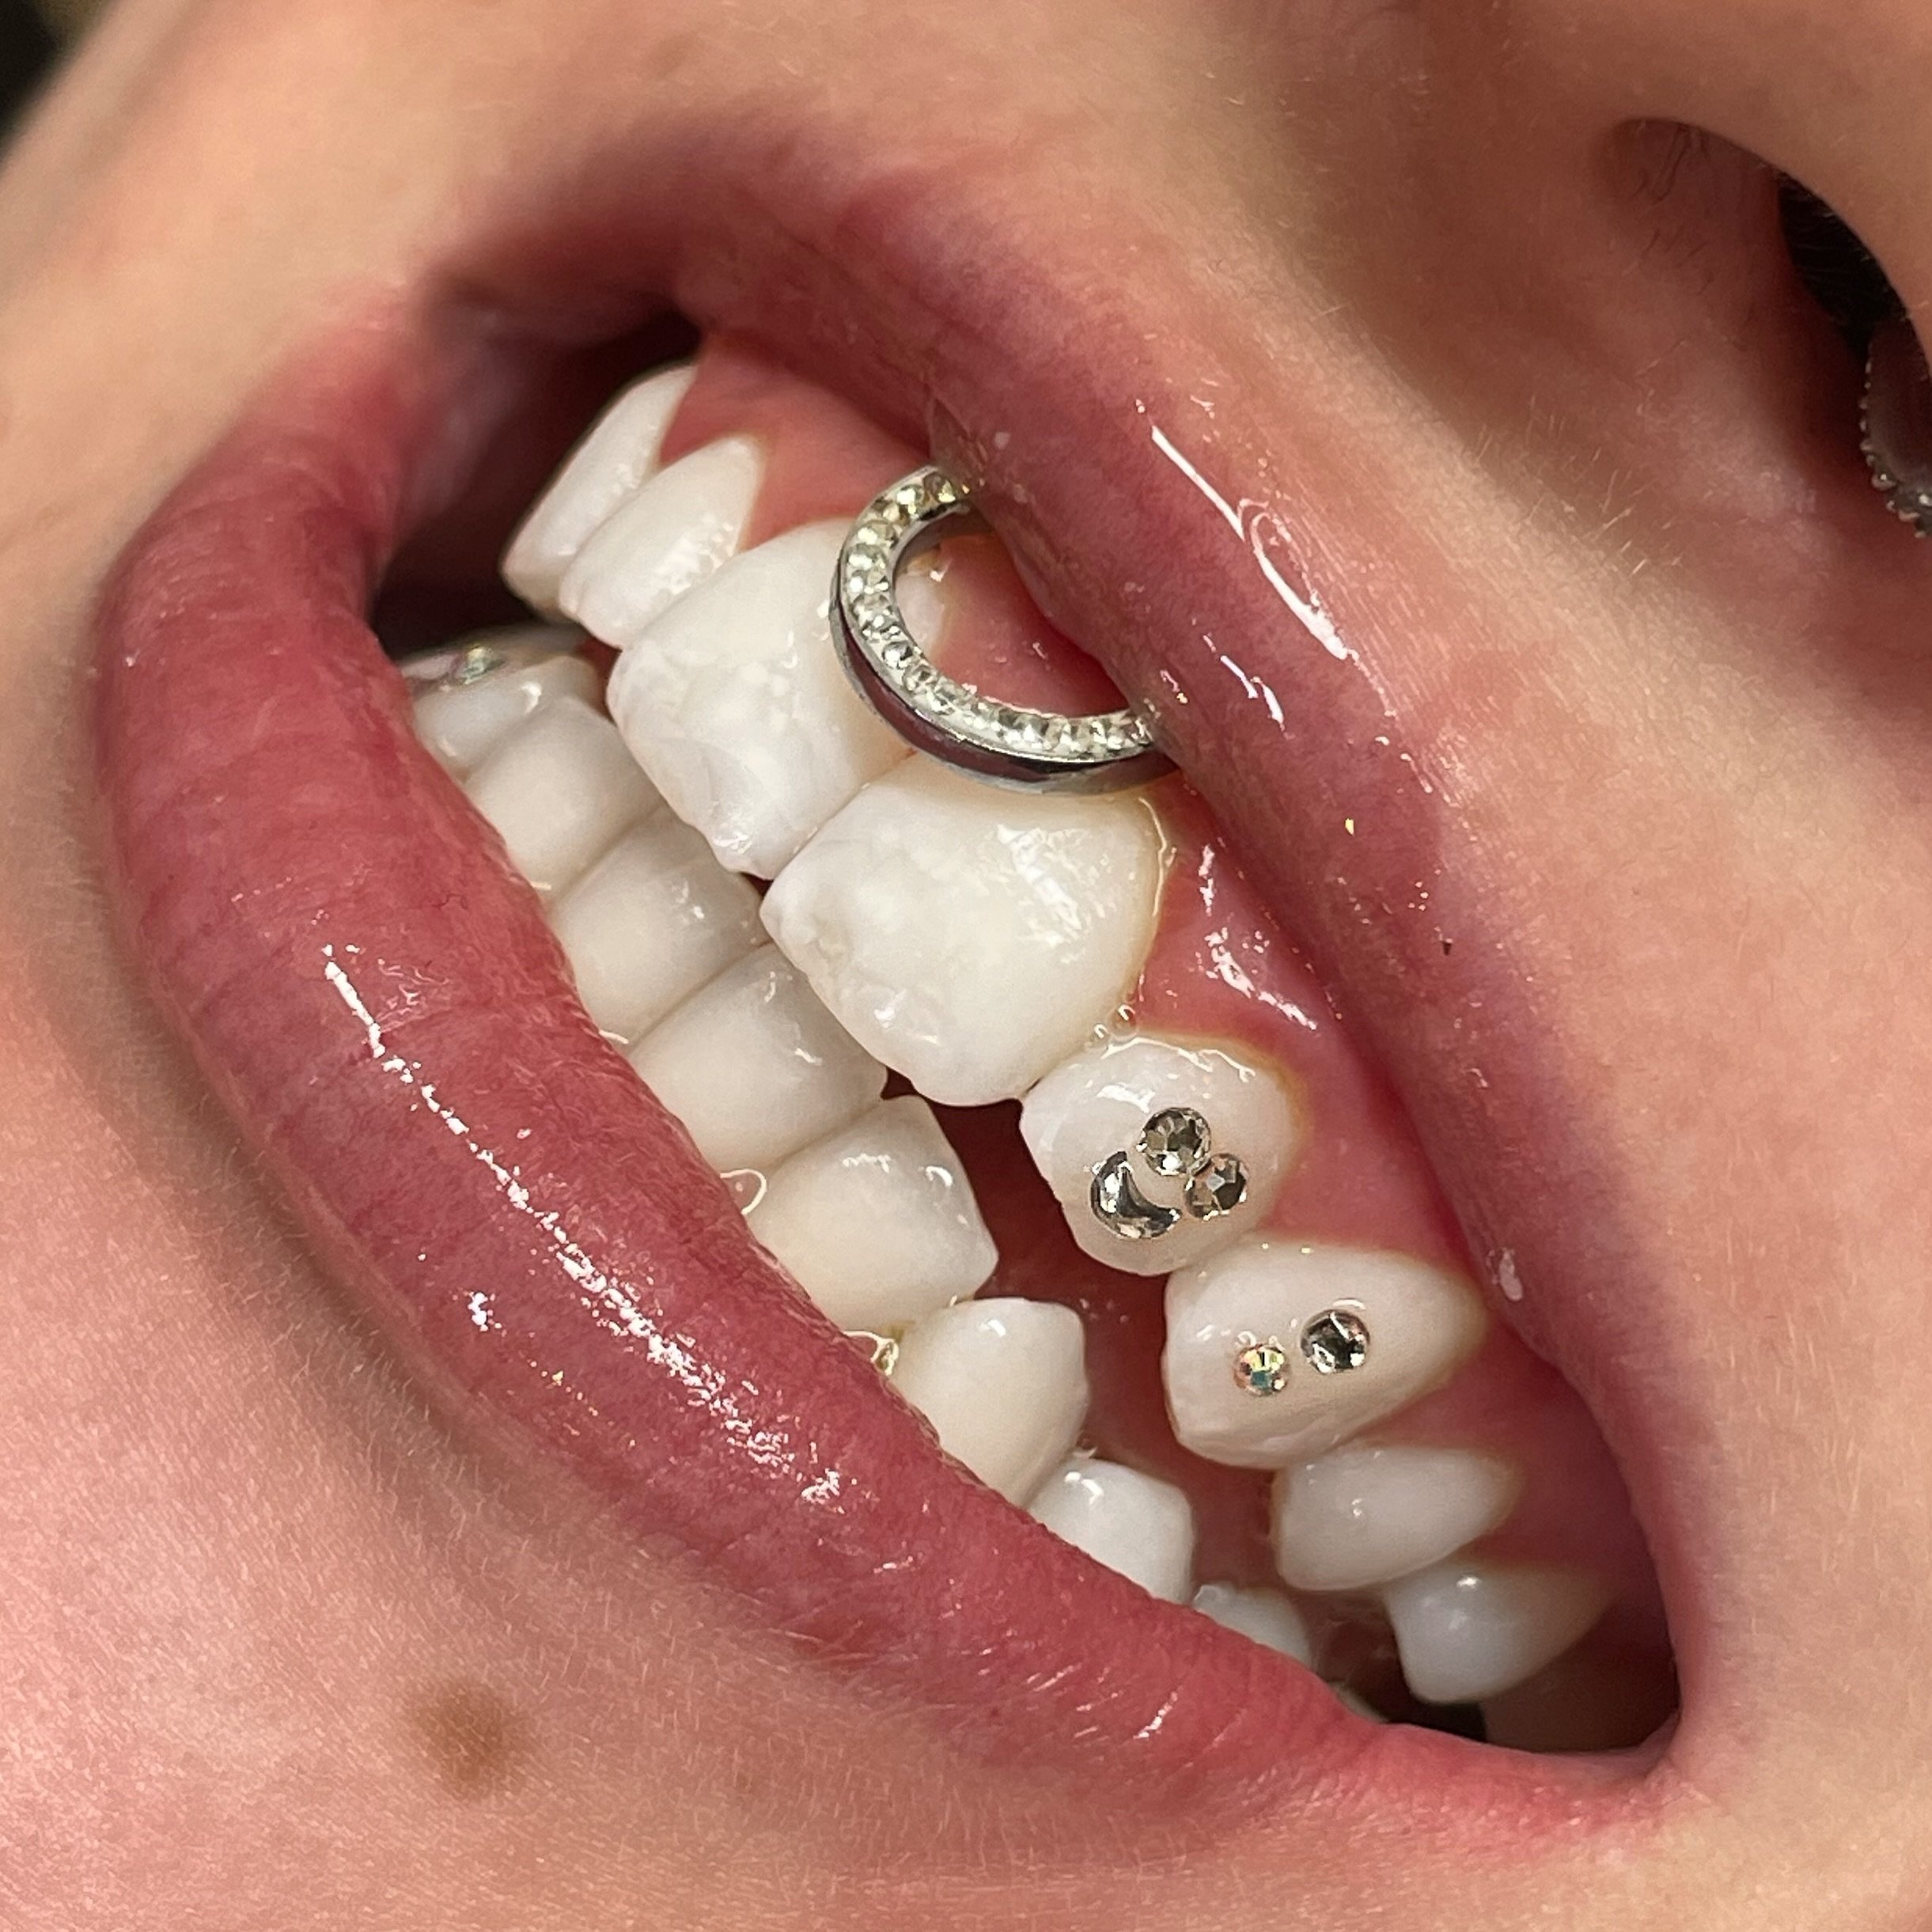 Tooth gems! 😃

😃 Crystal clear smiley face
💕 Iridescent stack
✨ Iridescent lower tooth 

📓TO BOOK WITH VANASSA :
Send a or www.studiovanassa.com

📍Studio Vanassa
💌 vanassa@studiovanassa.com
💻 www.studiovanassa.com 
📞 780-297-8030

#edmonton #